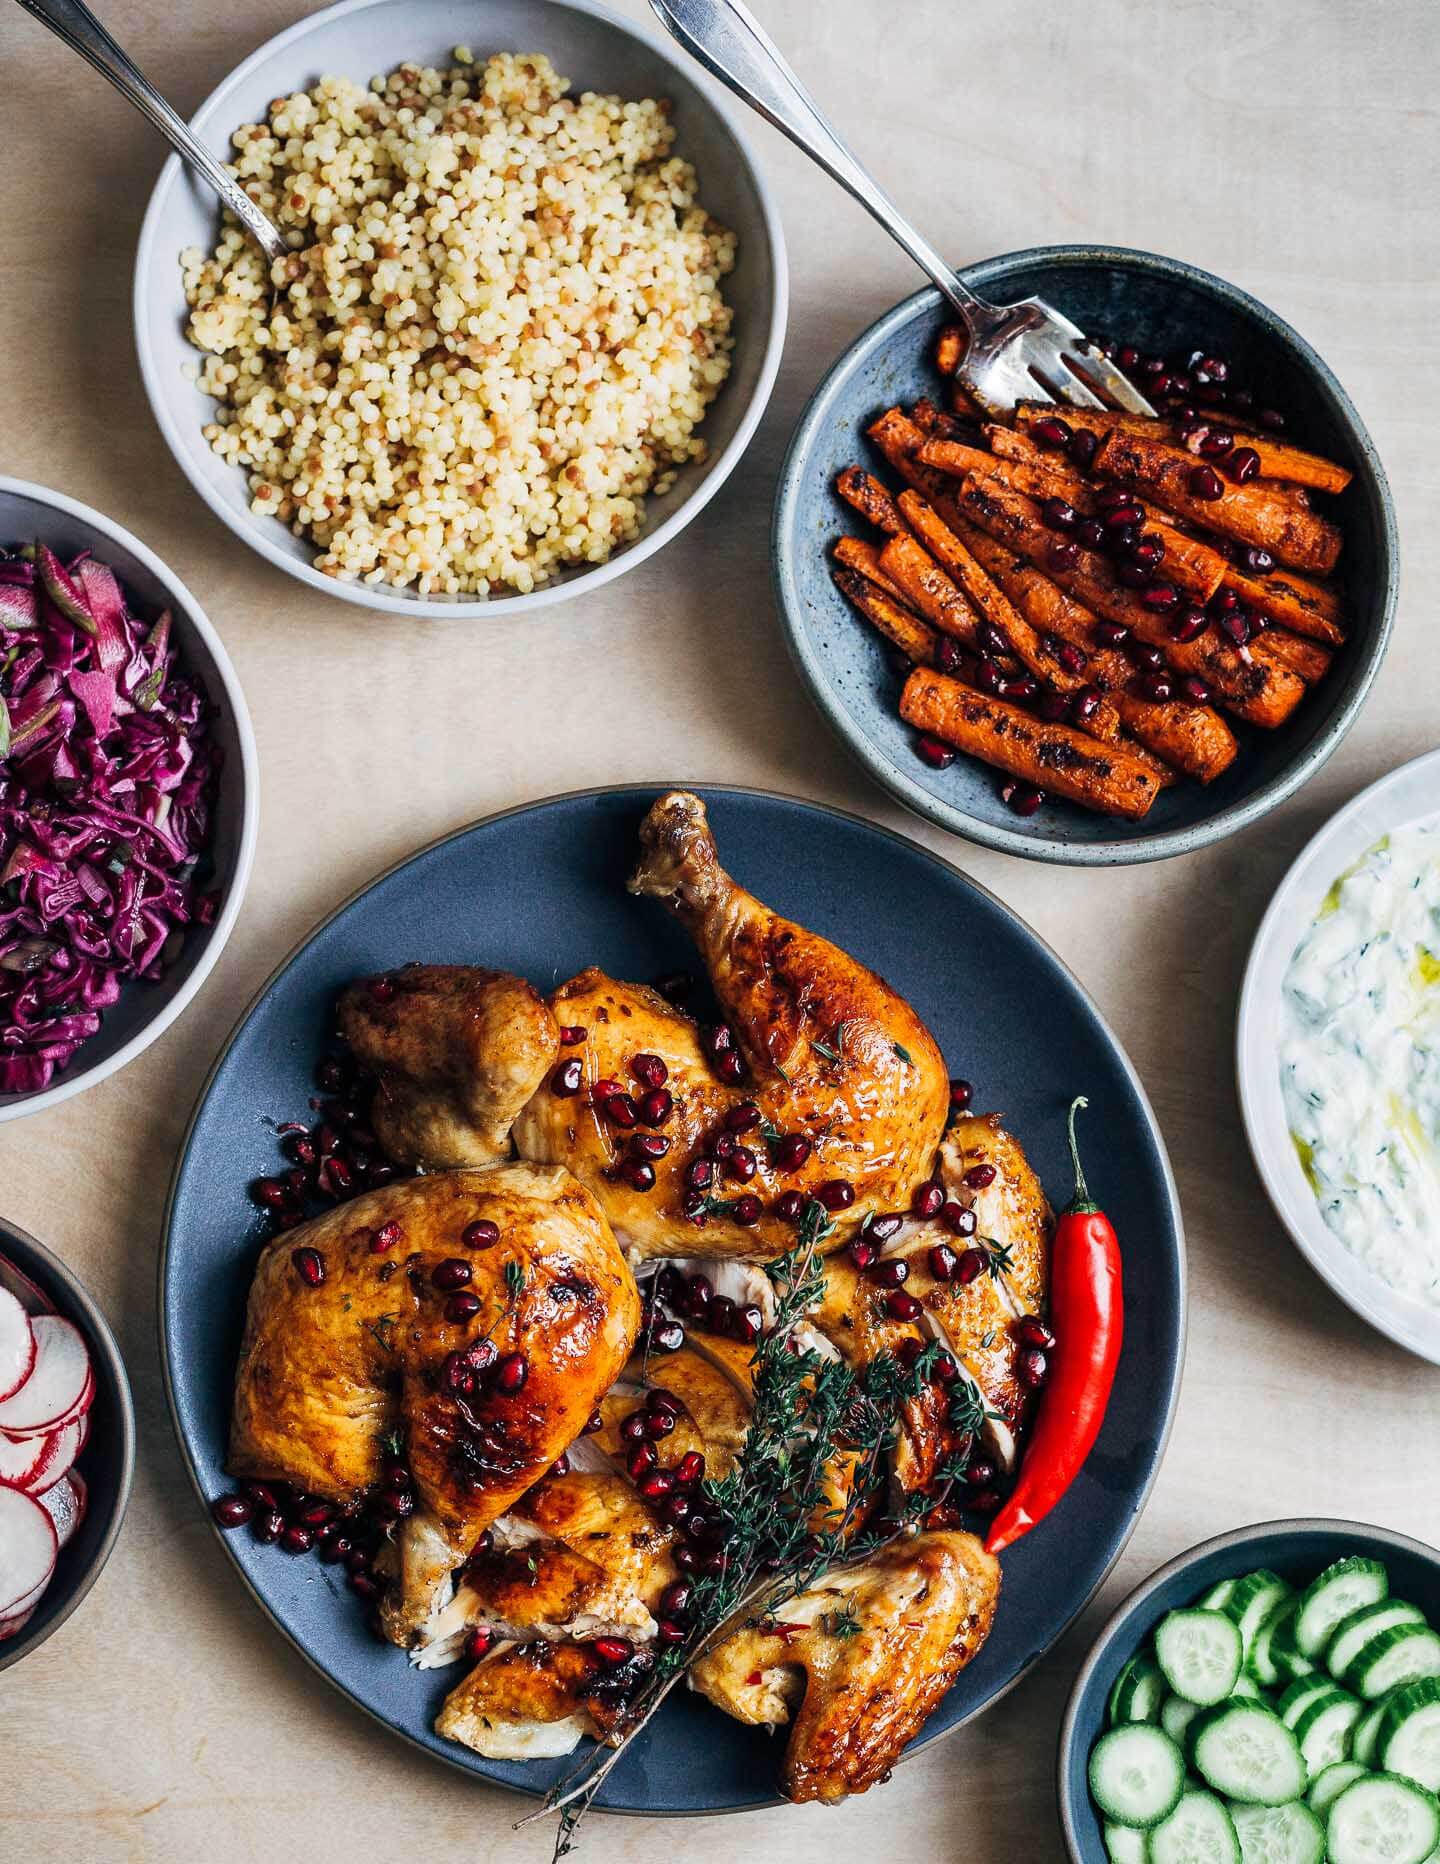 Make a Christmas feast to remember with this sumptuously flavored pomegranate-glazed roasted chicken and a host of colorful sides.